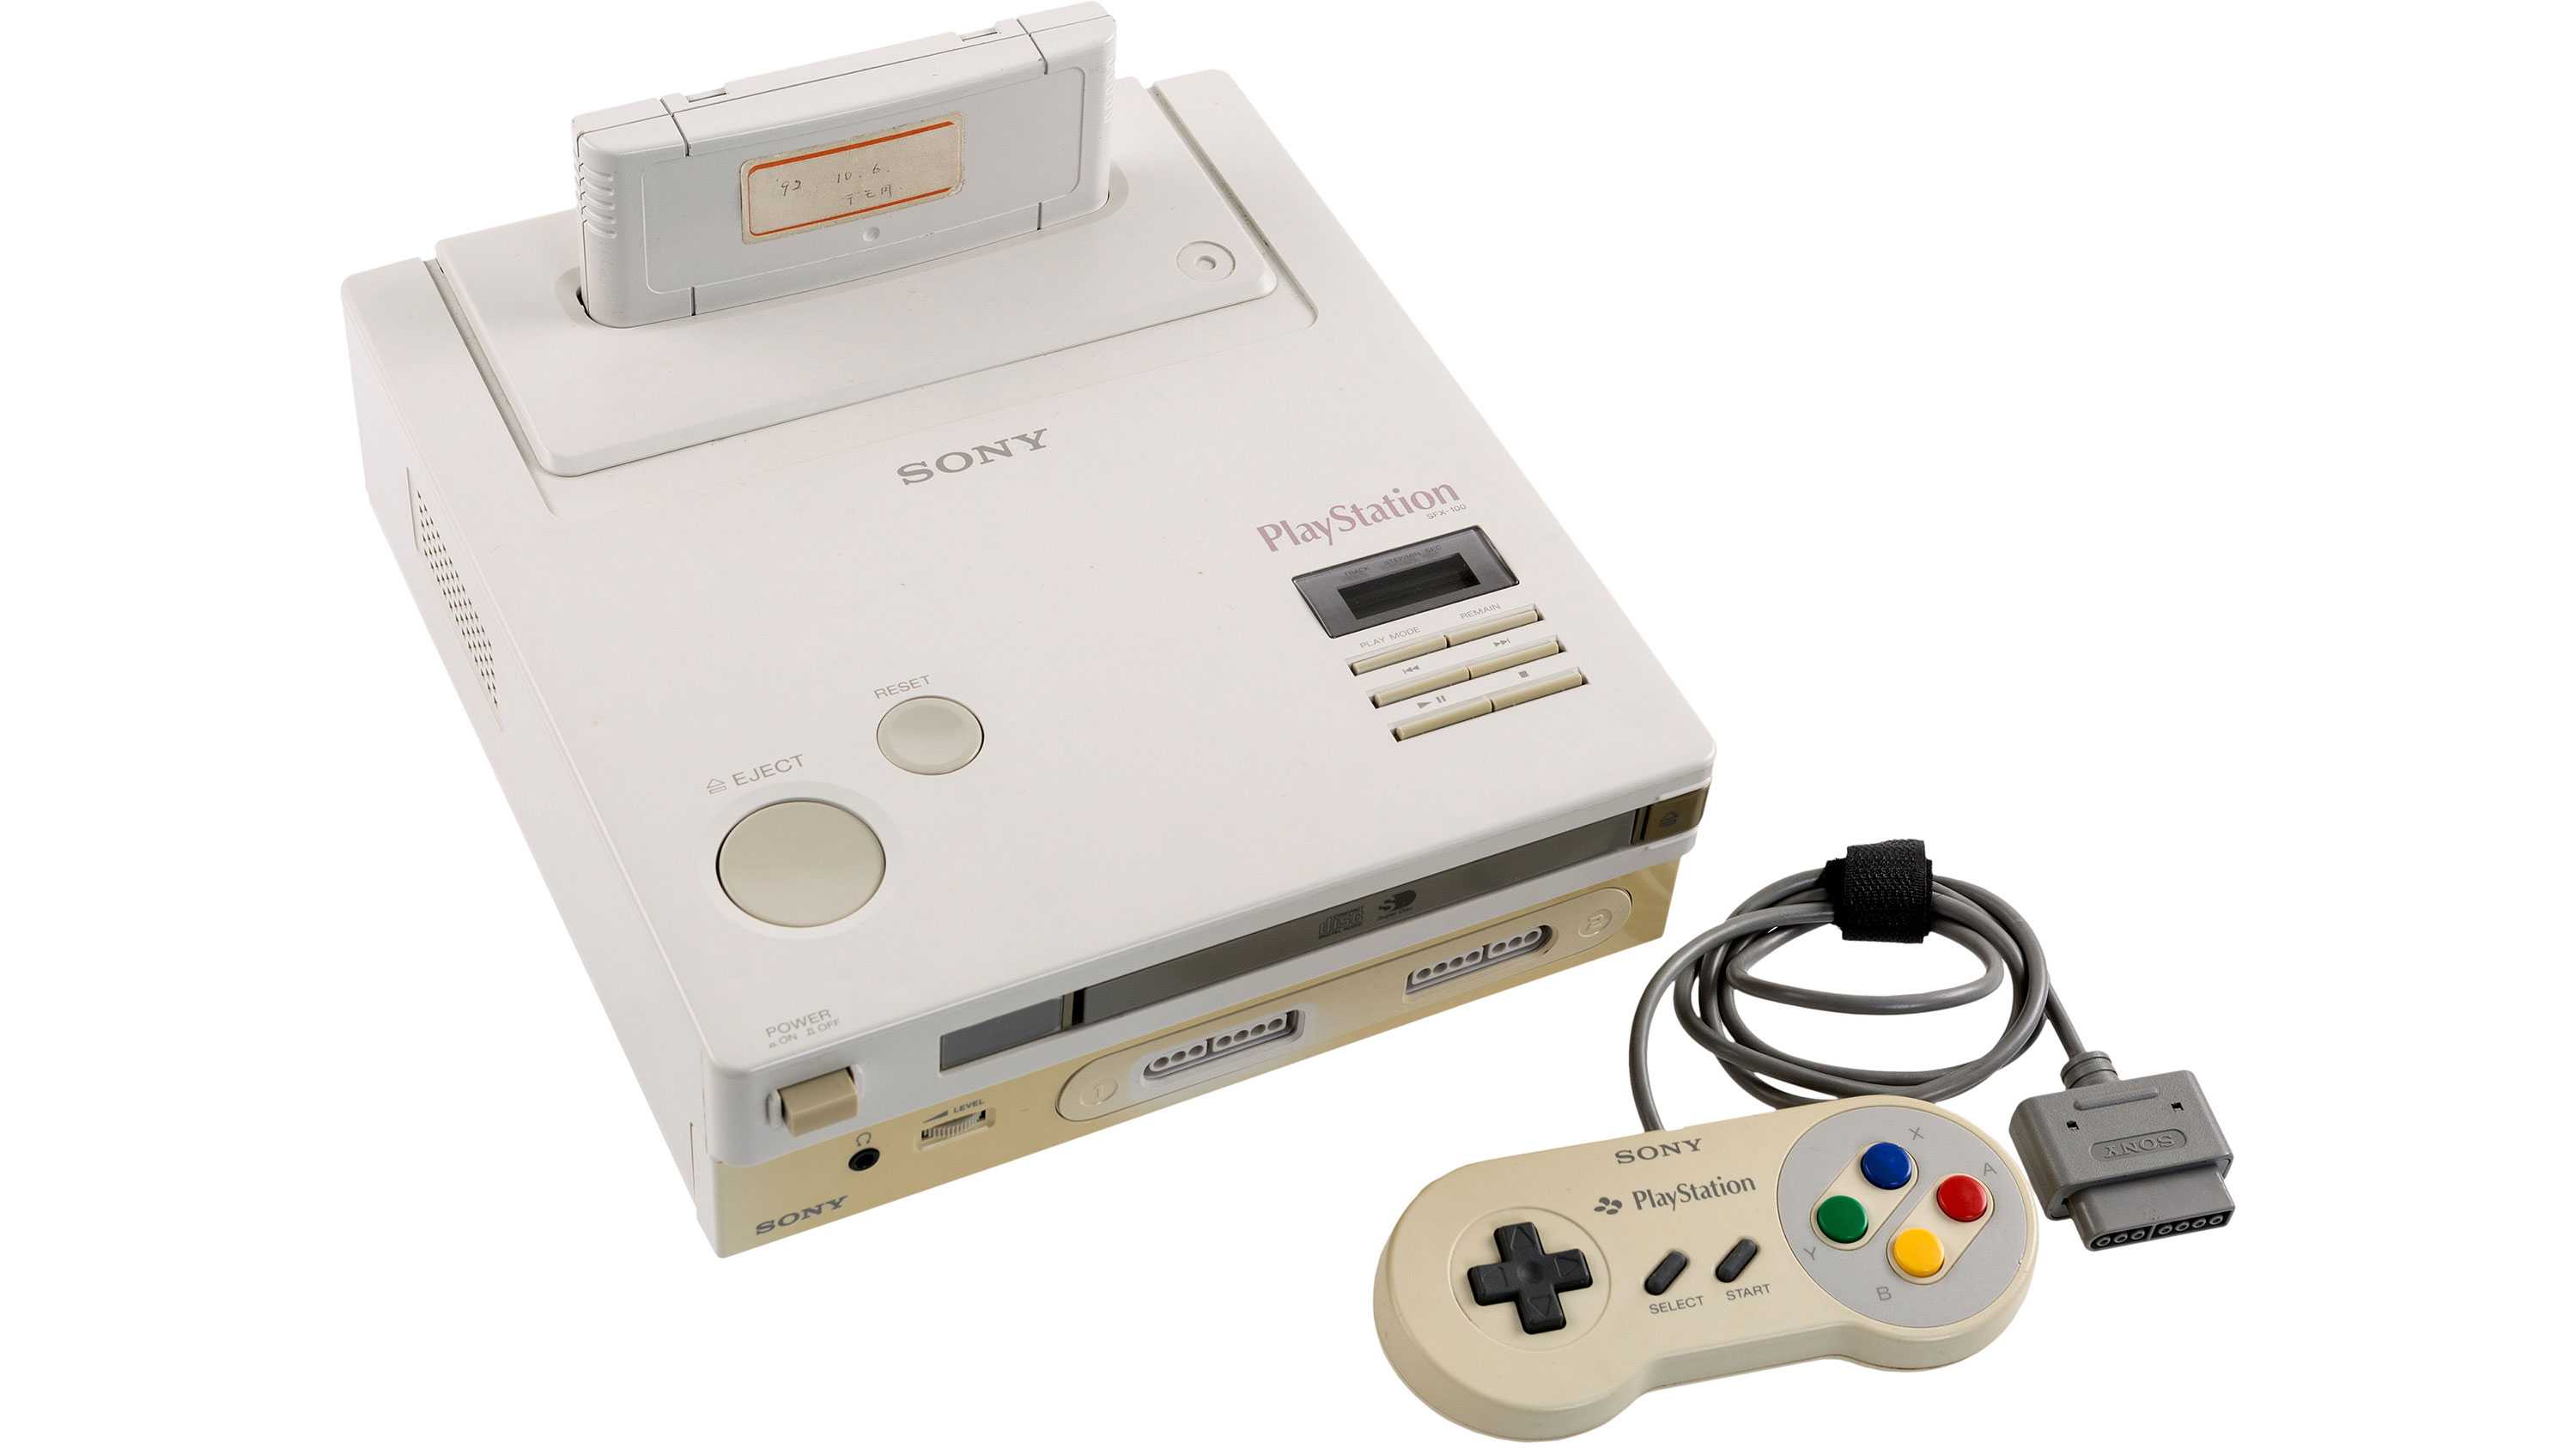 A prototype Nintendo PlayStation just sold for $360K